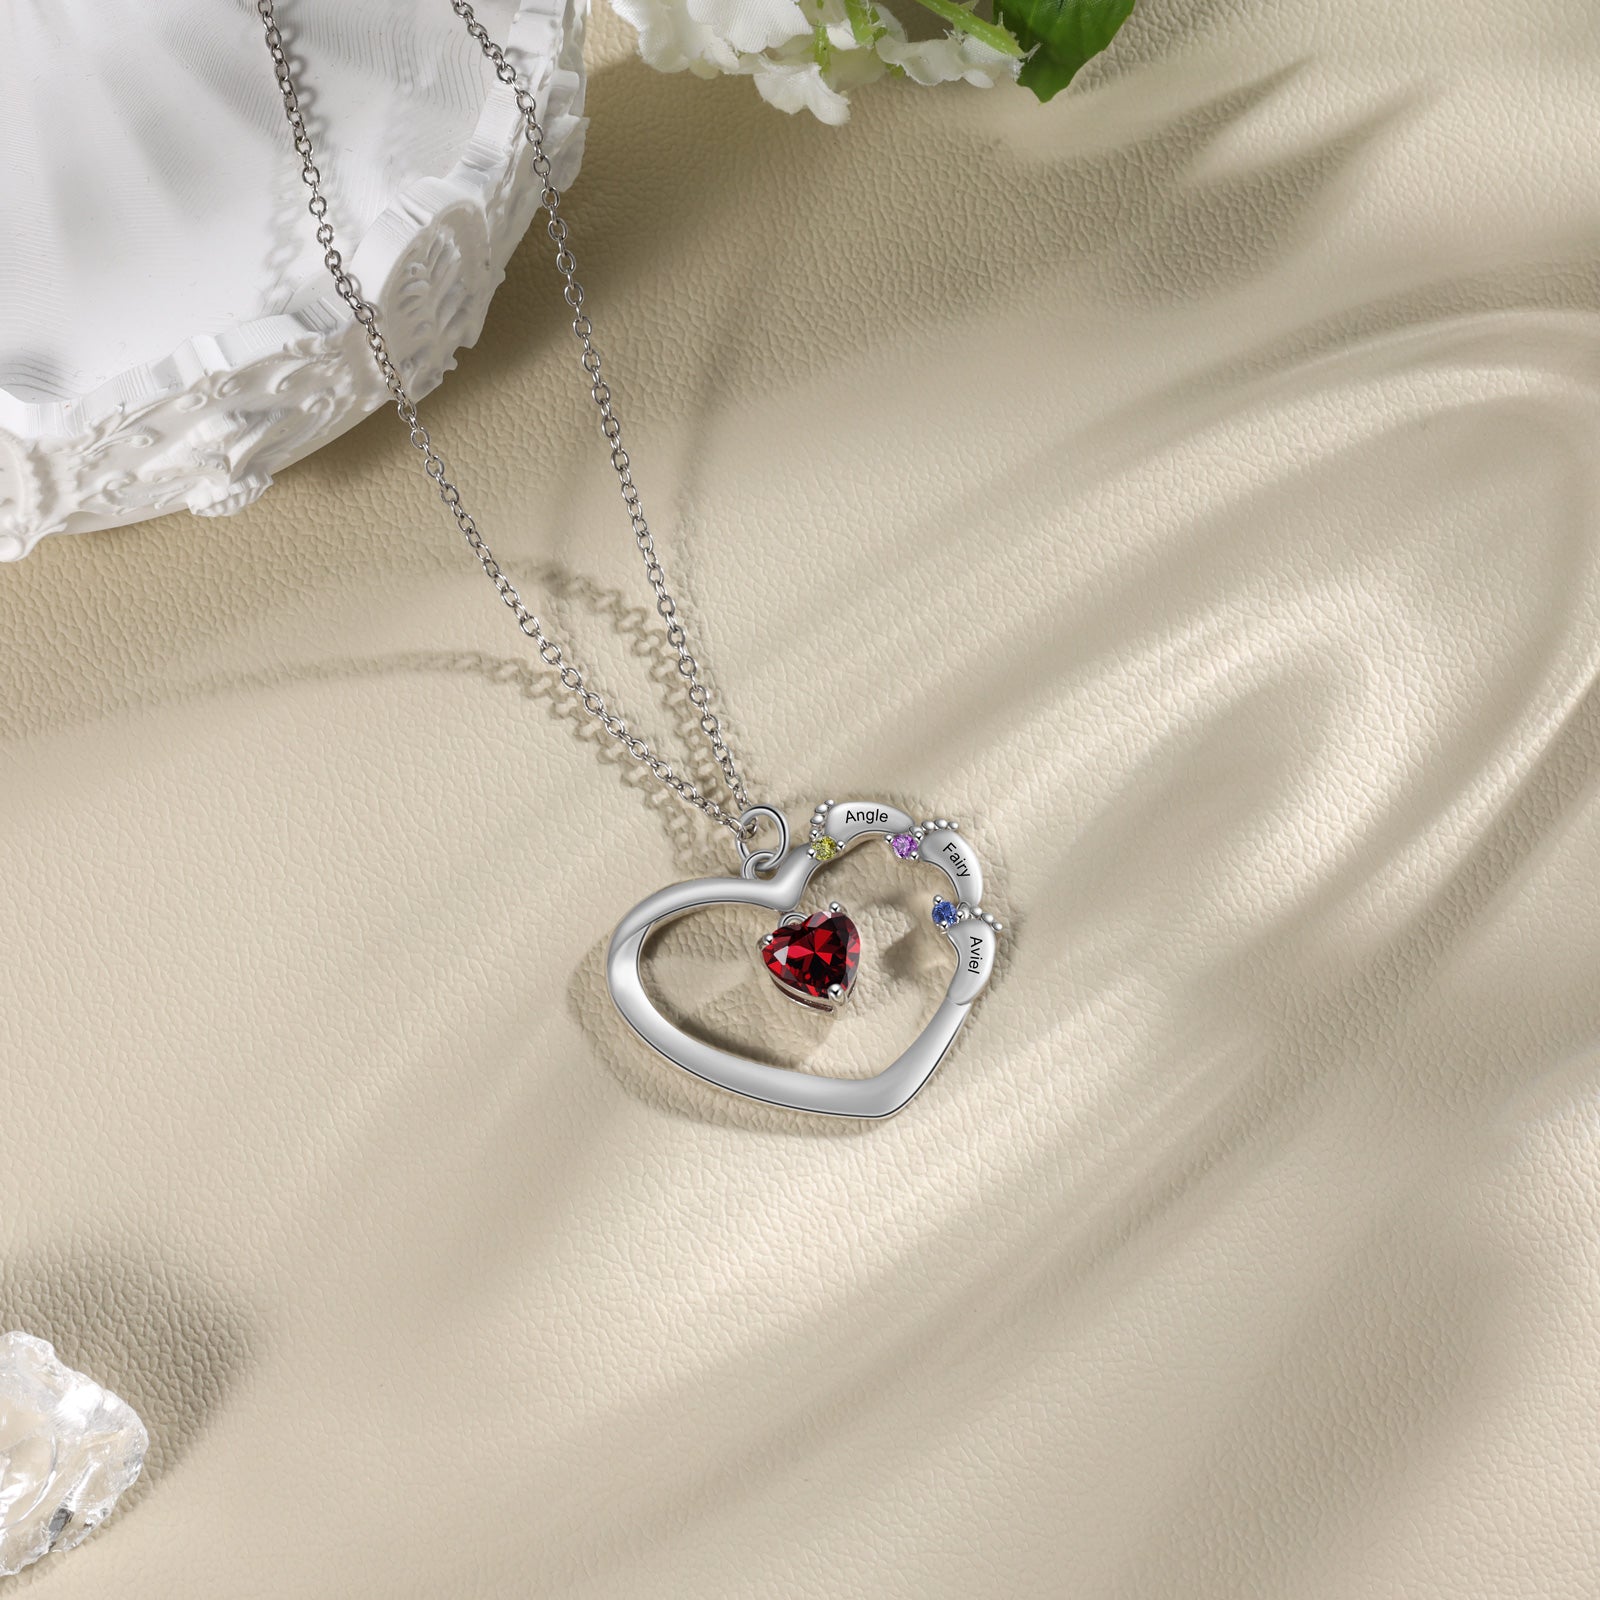 ThinkEngraved mothers necklace Personalized Mother's Necklace Heart and Baby Feet 4 Birthstone 3 Names Dangle Gem